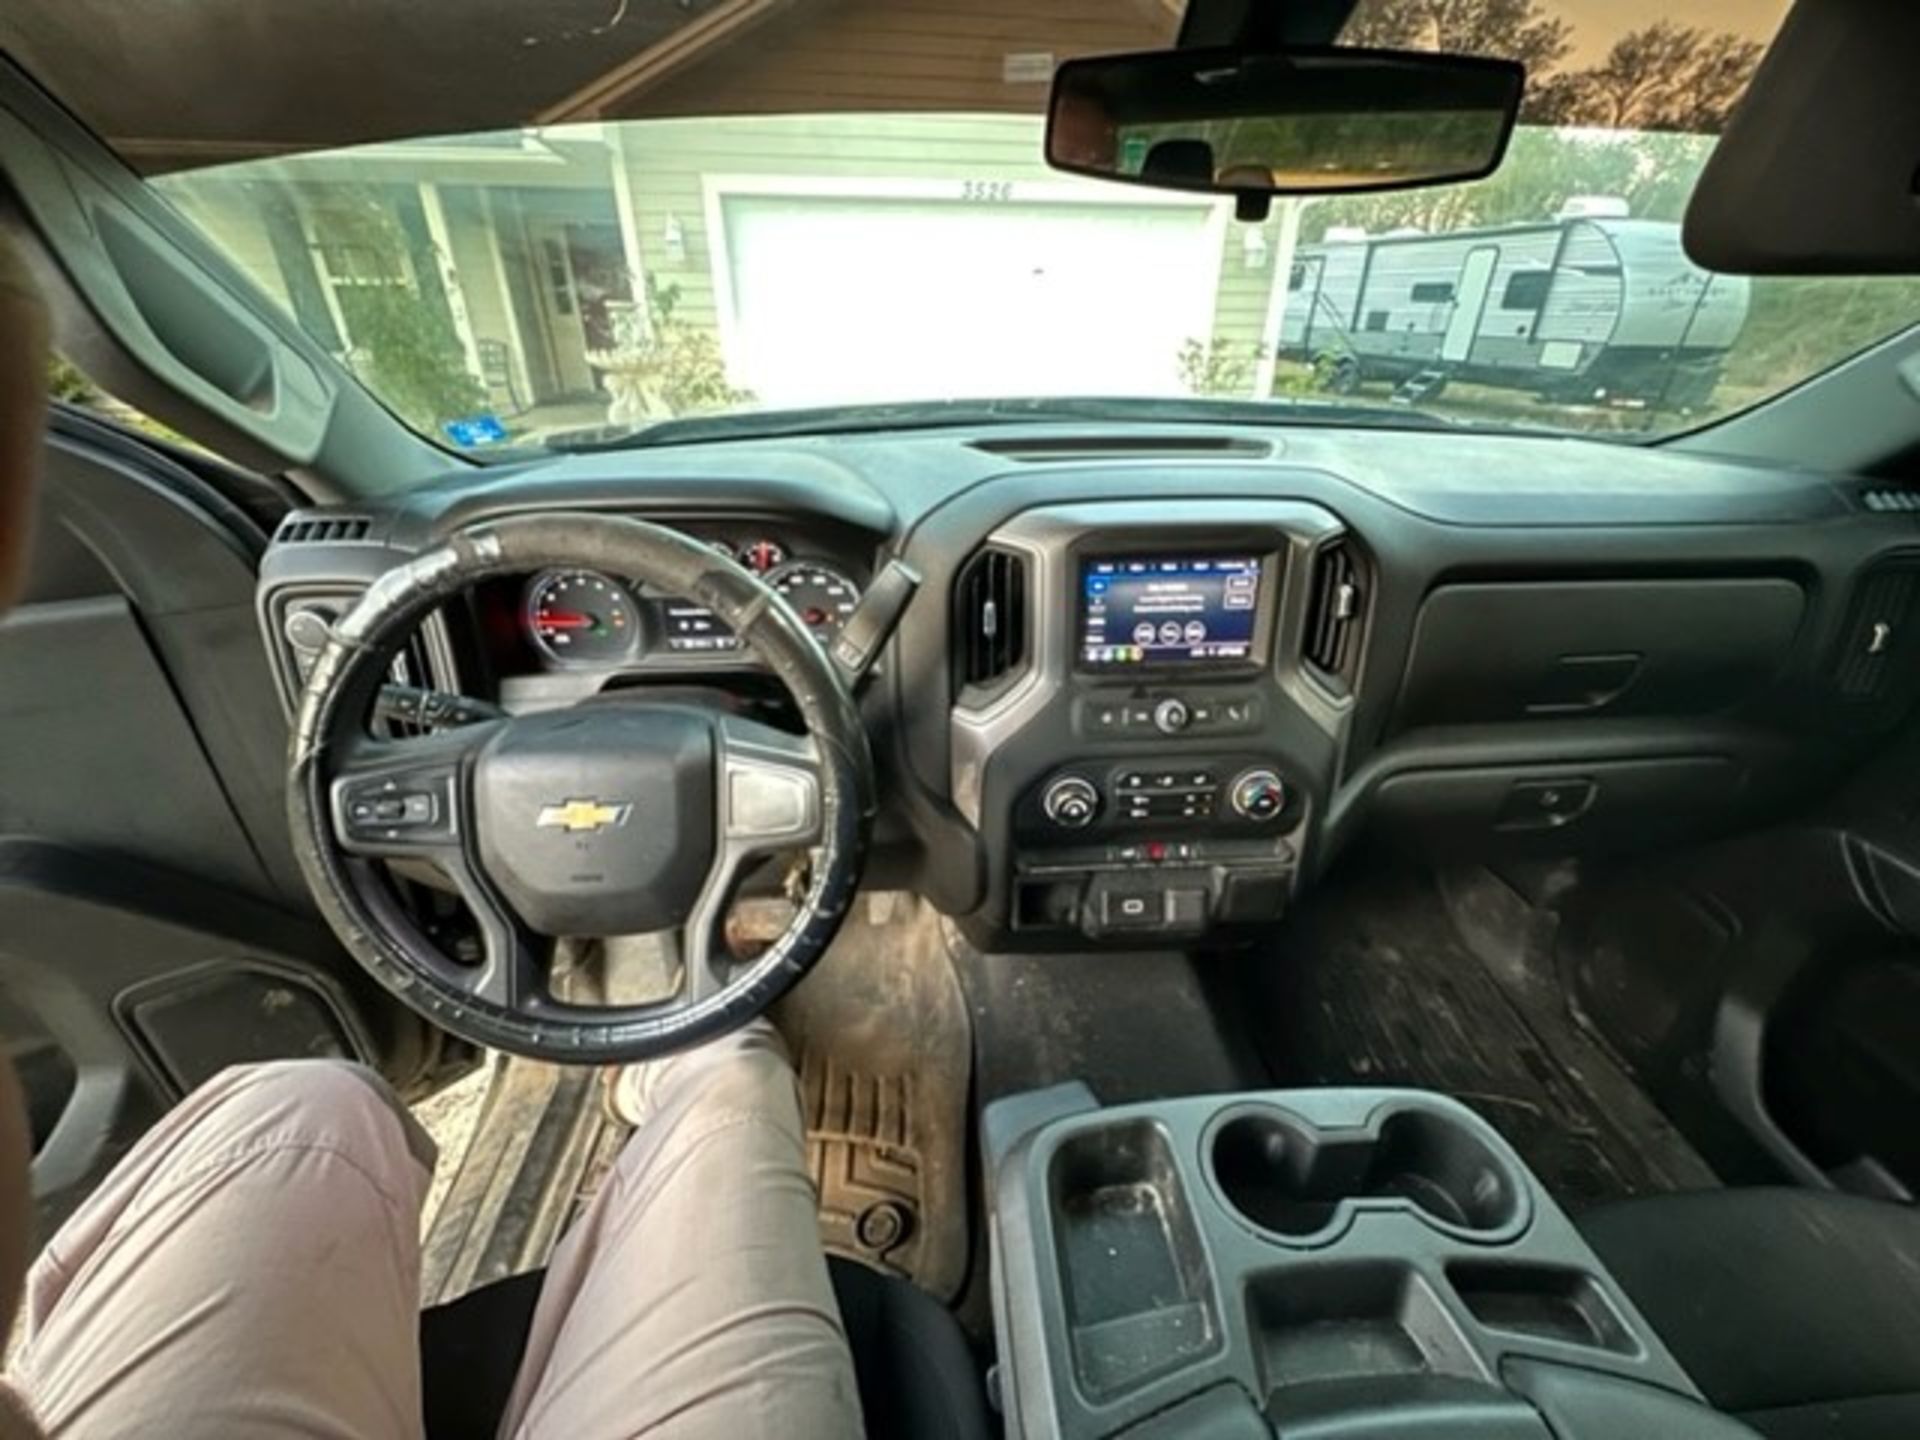 2020 Chevy Silverado 1500 4WD Crew Cab Pickup, VIN 1GCUYBEF1LZ151626, 92,000 Miles Indicated, P117 ( - Image 5 of 11